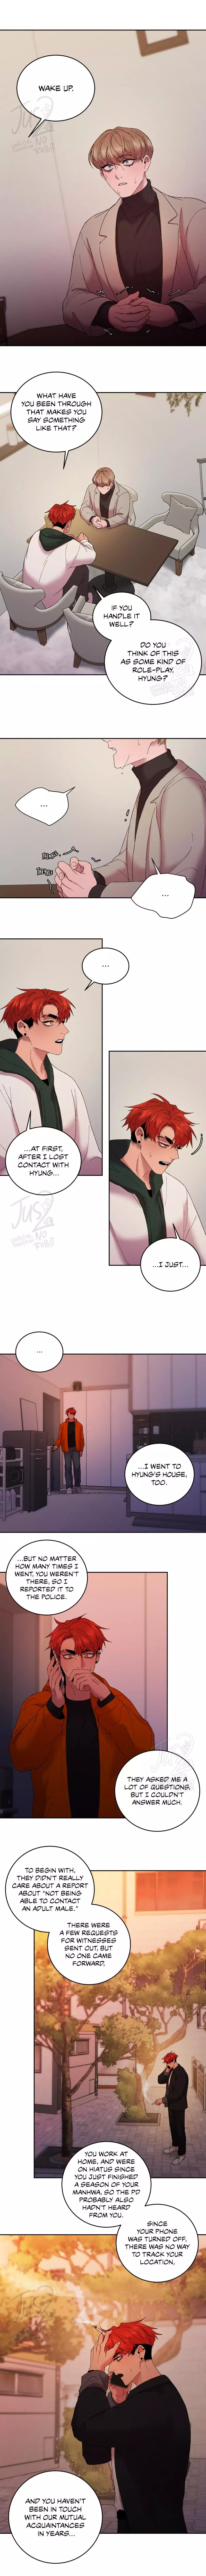 Hwanyoung's Misery - 21 page 6-083cde91